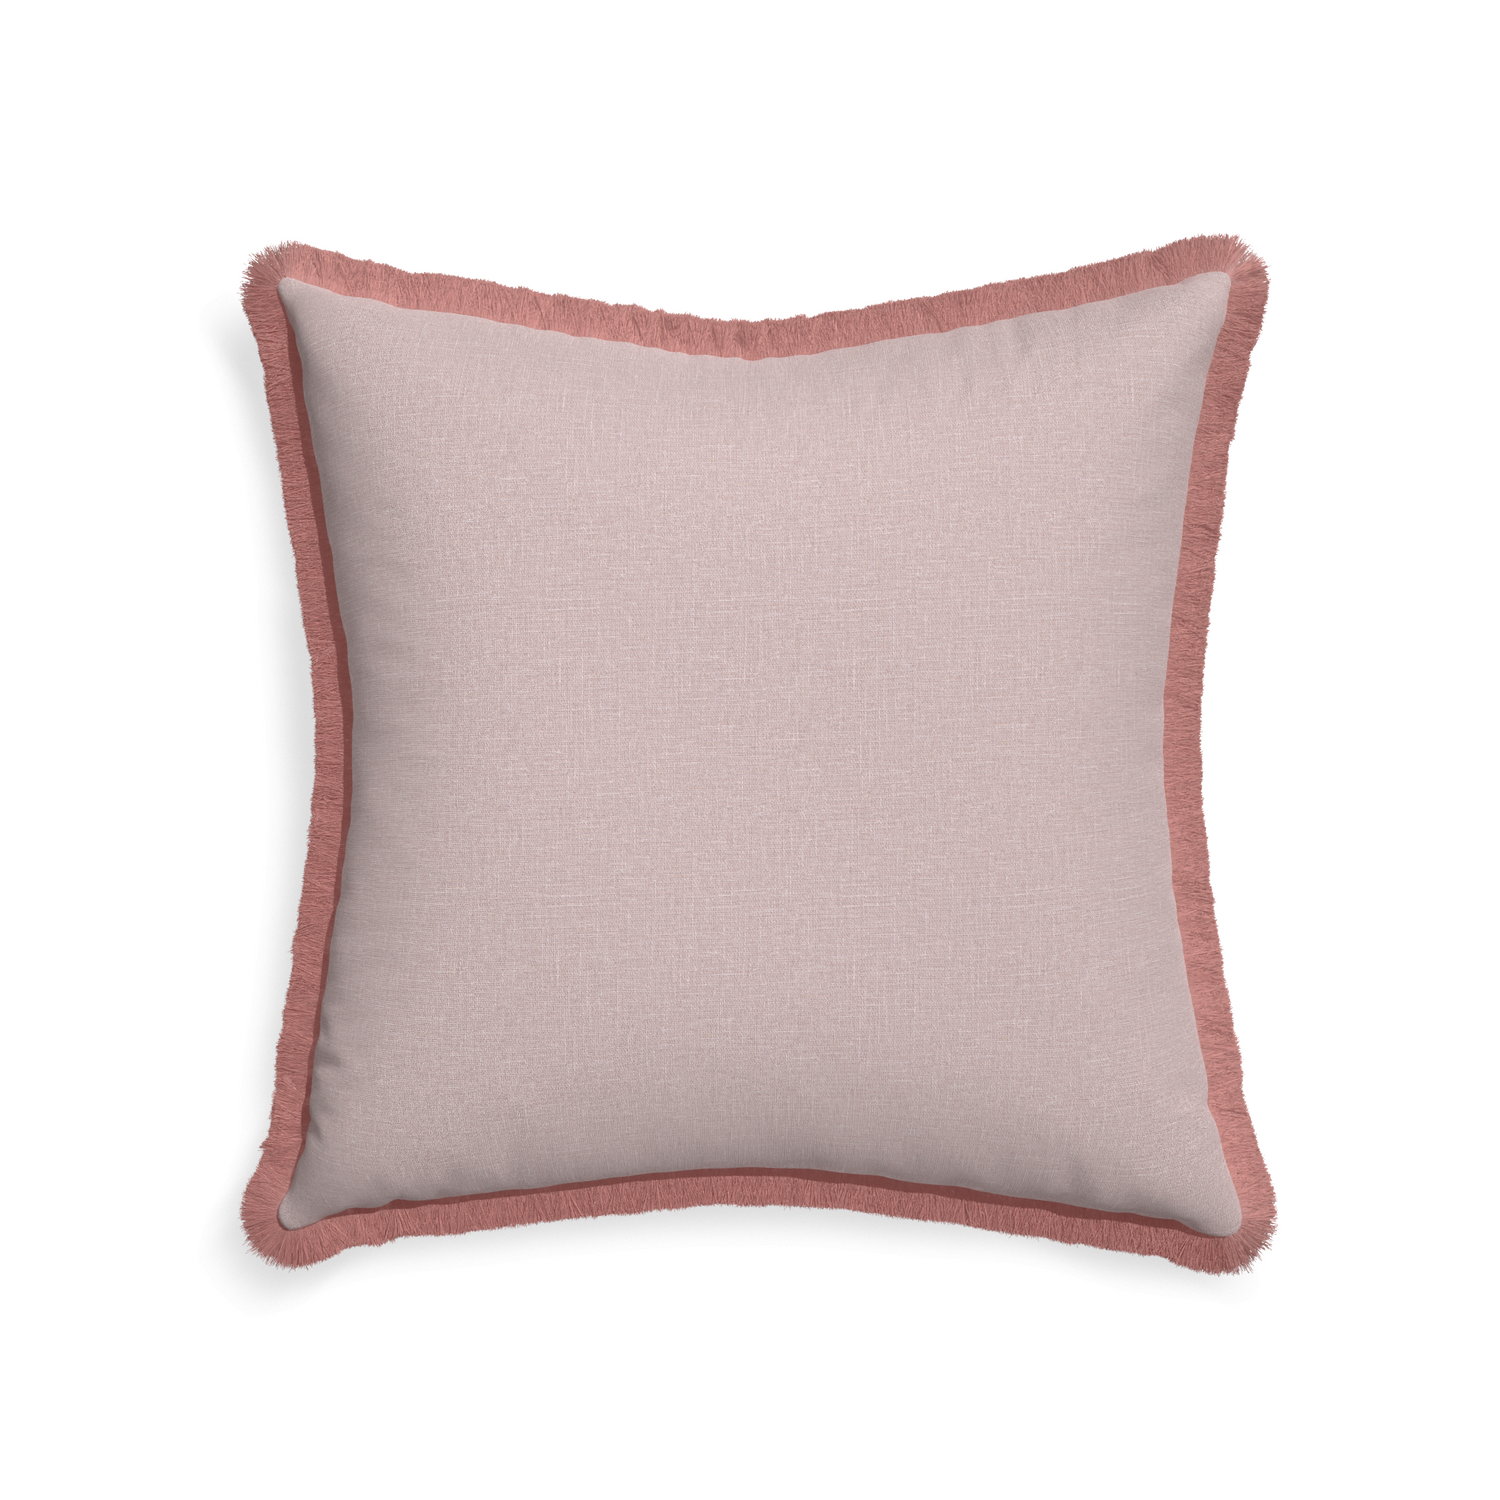 22-square orchid custom mauve pinkpillow with d fringe on white background